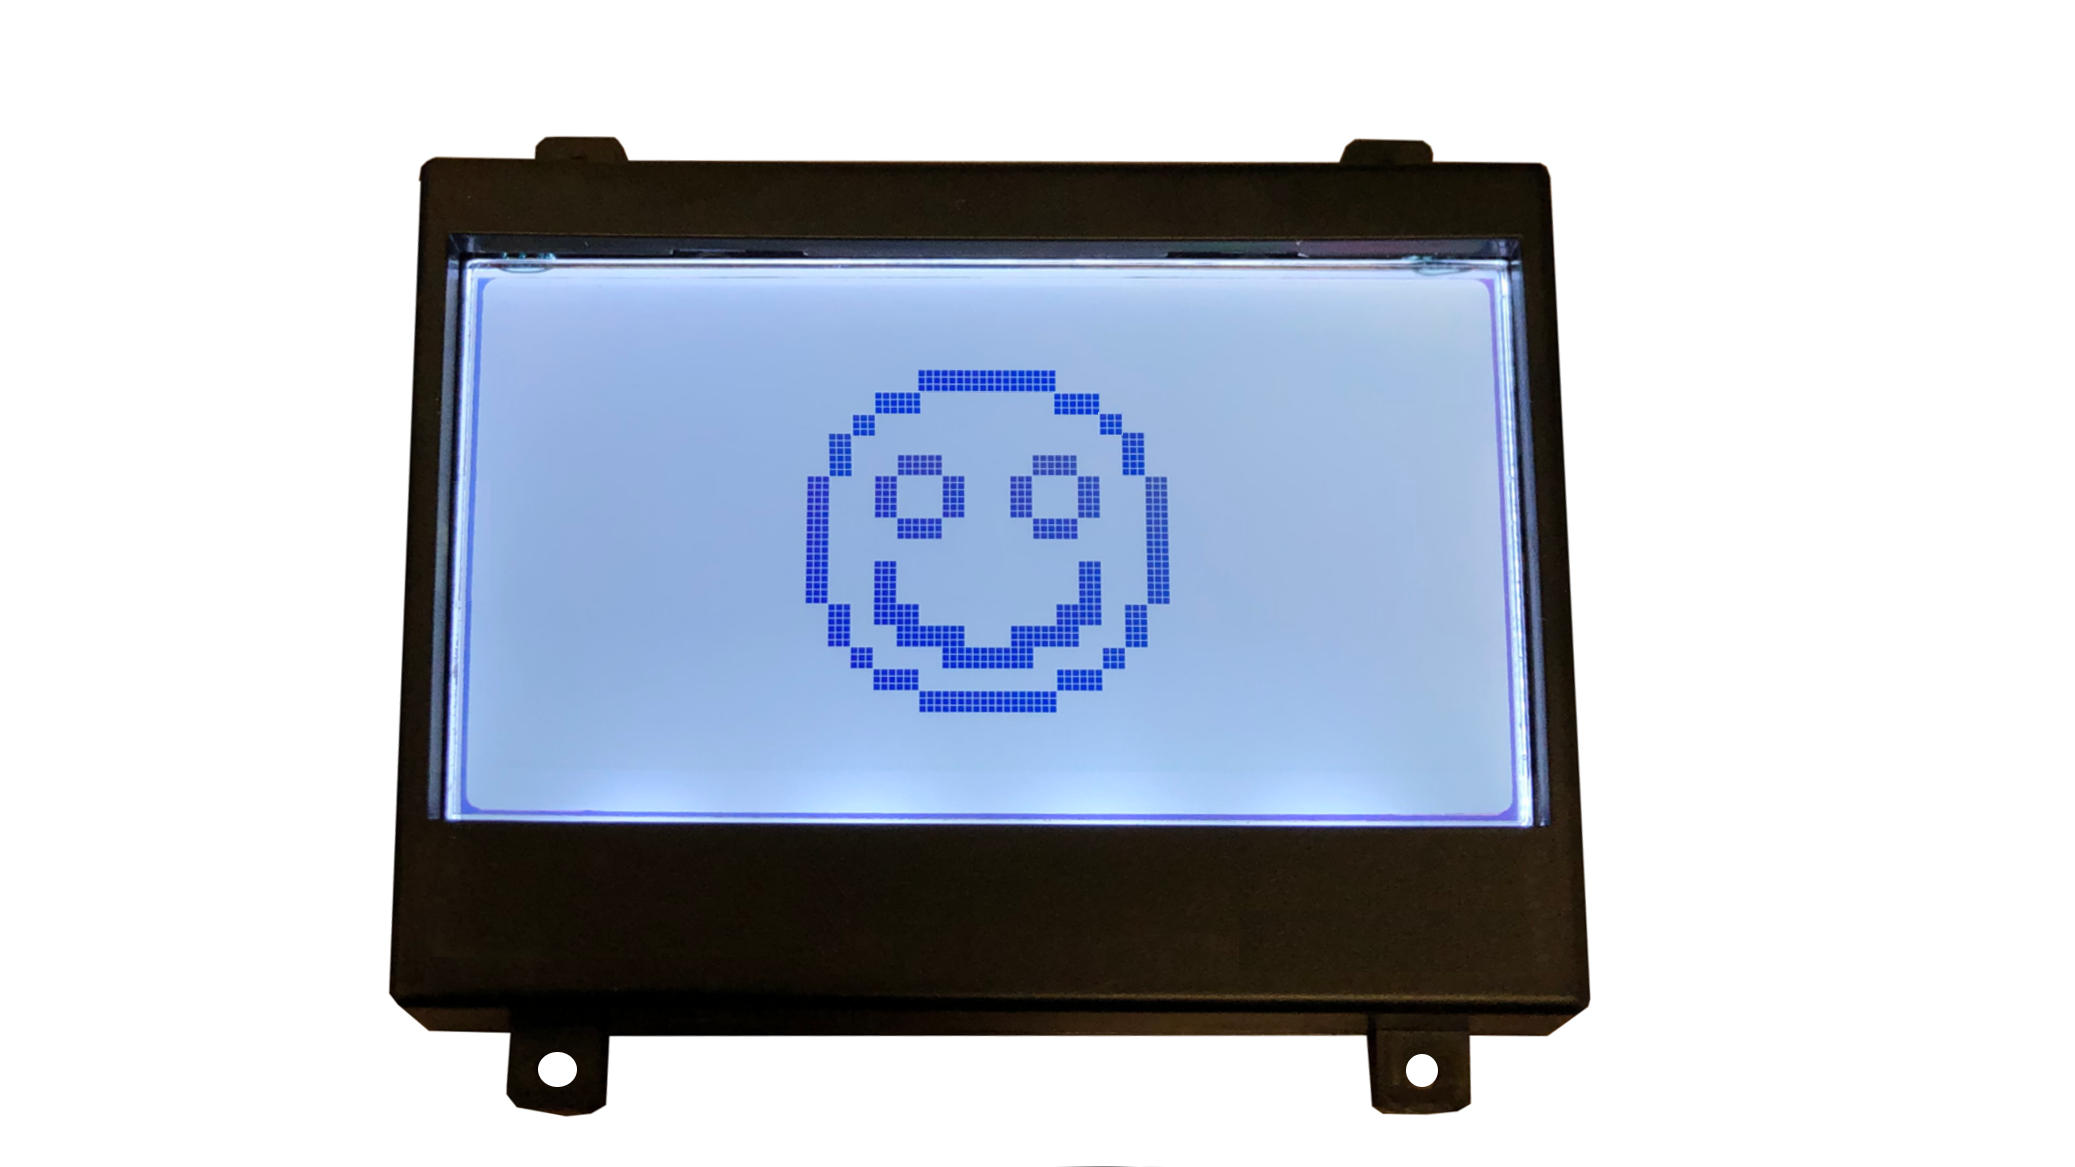 Bitmaps with the Graphic LCD Phidget